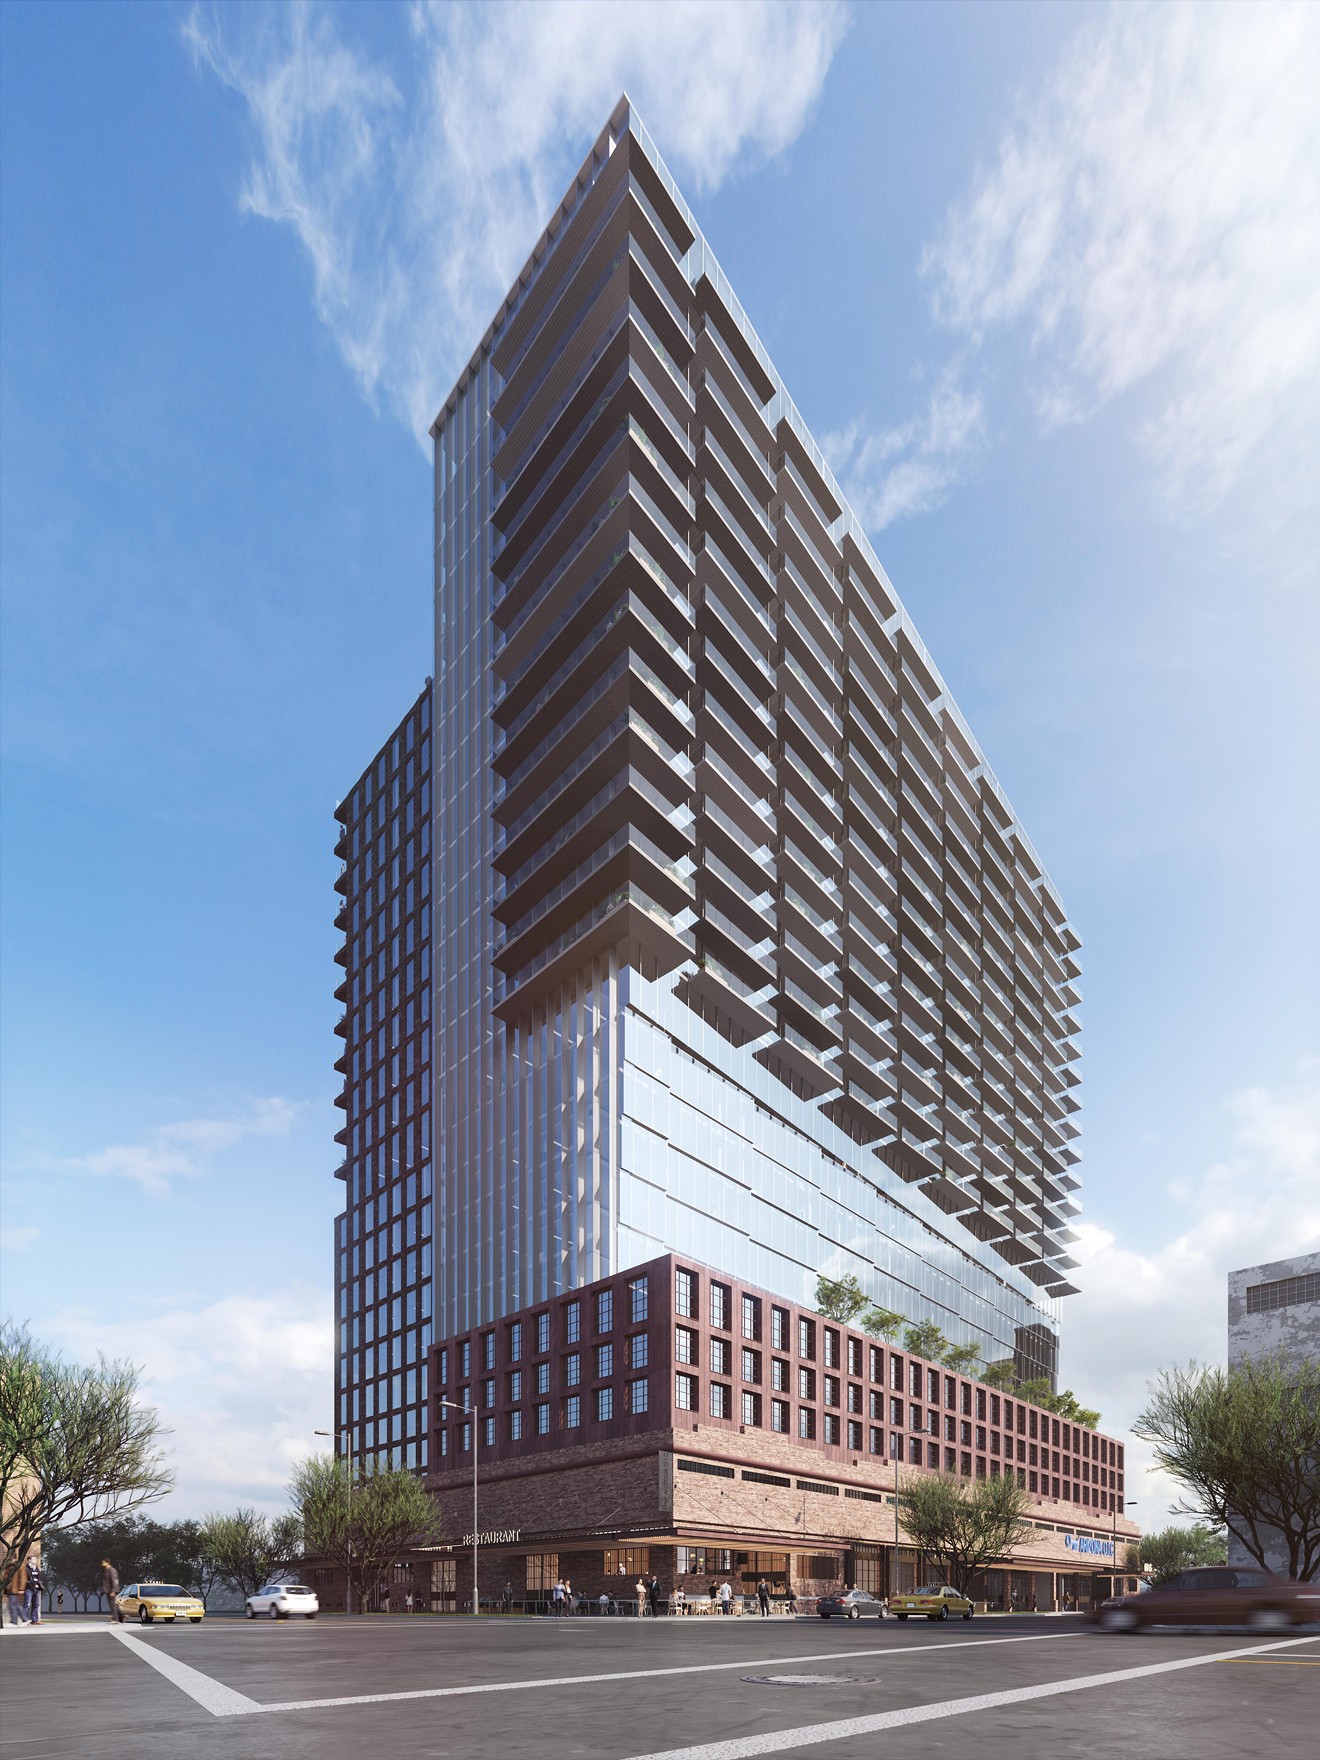 An architect's rendering of the upcoming Fairmont Hotel in downtown Phoenix.